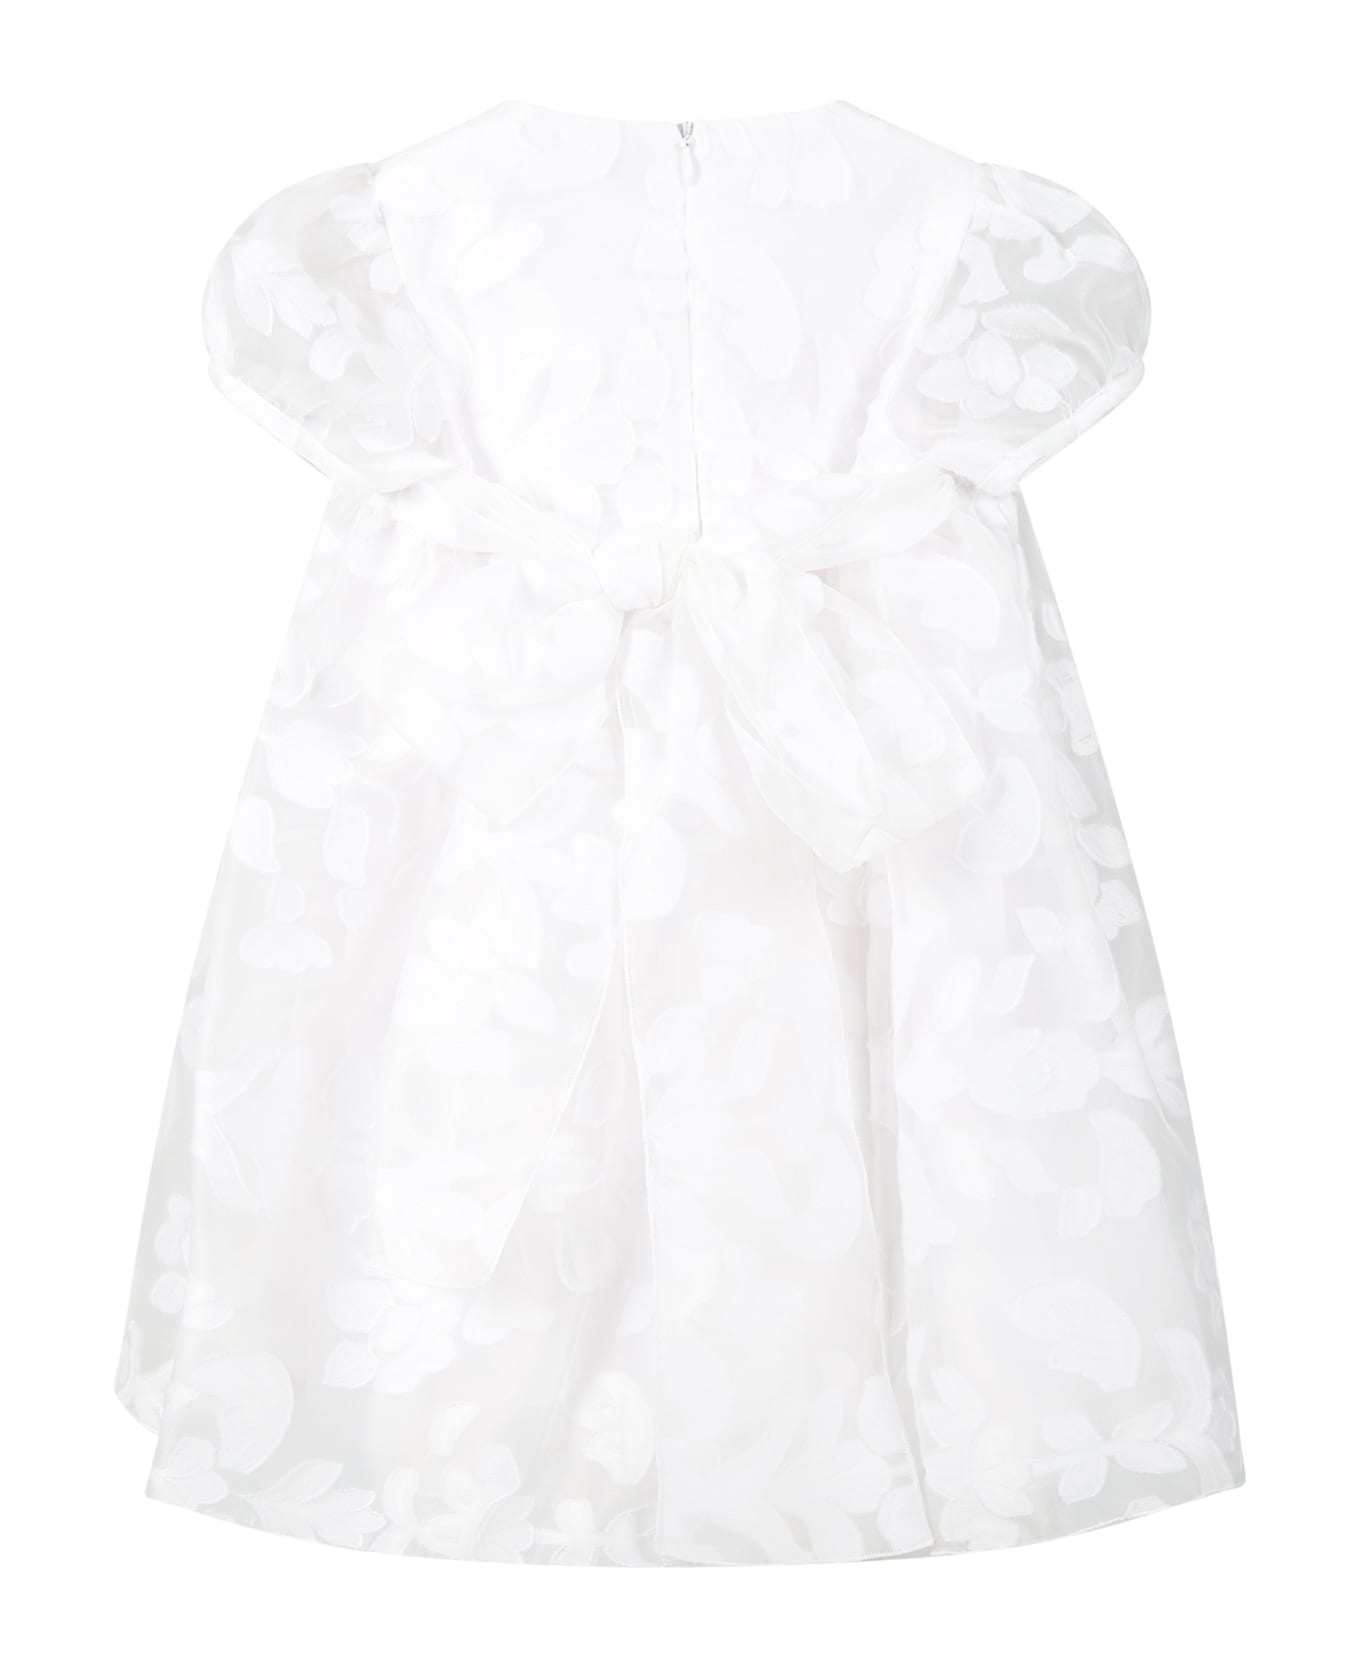 Little Bear White Dress For Baby Girl With Floral Details - White